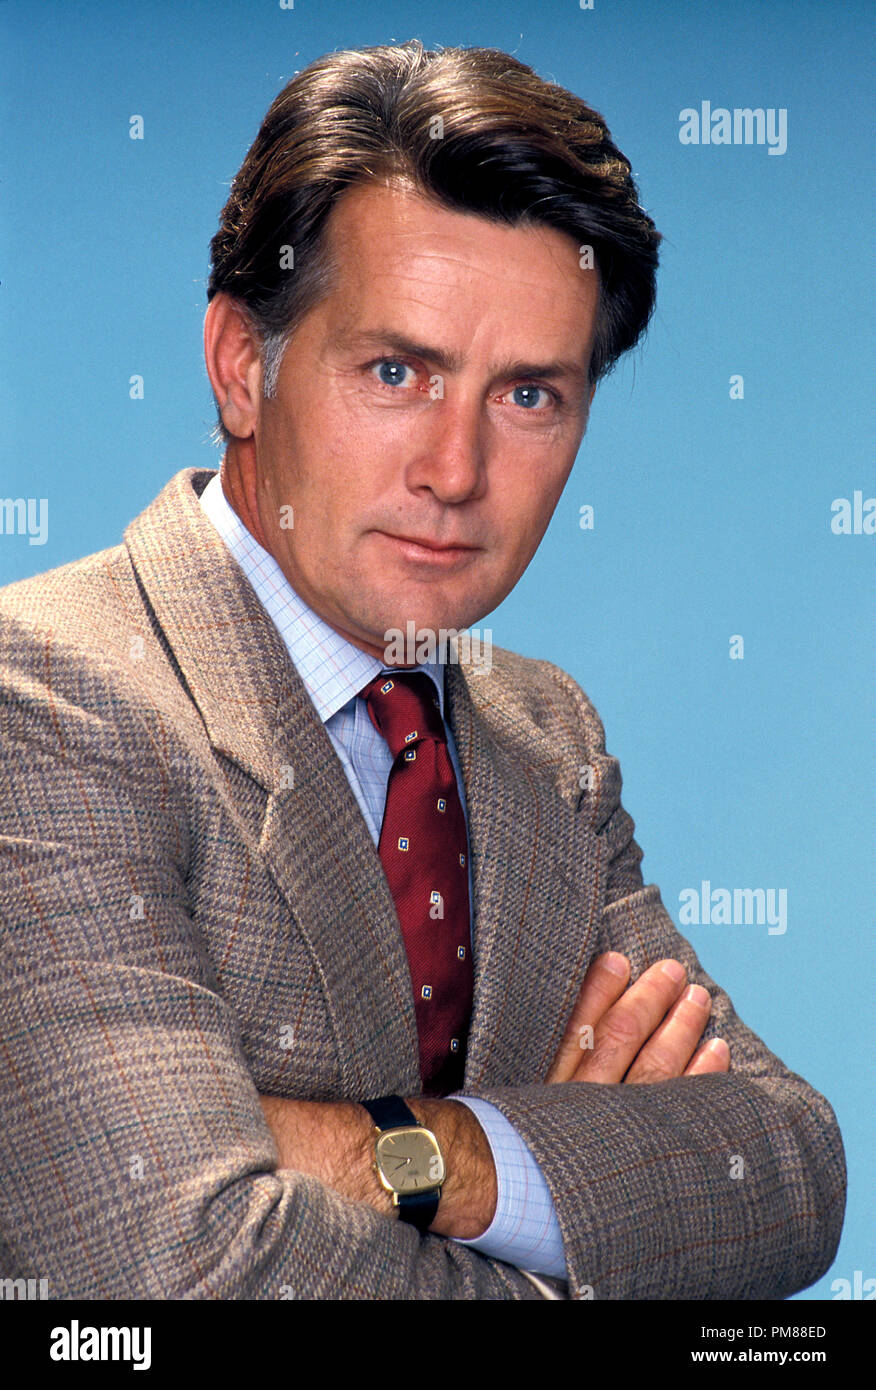 Studio Publicity Still from 'Consenting Adult' Martin Sheen 1985   All Rights Reserved   File Reference # 31703334THA  For Editorial Use Only Stock Photo